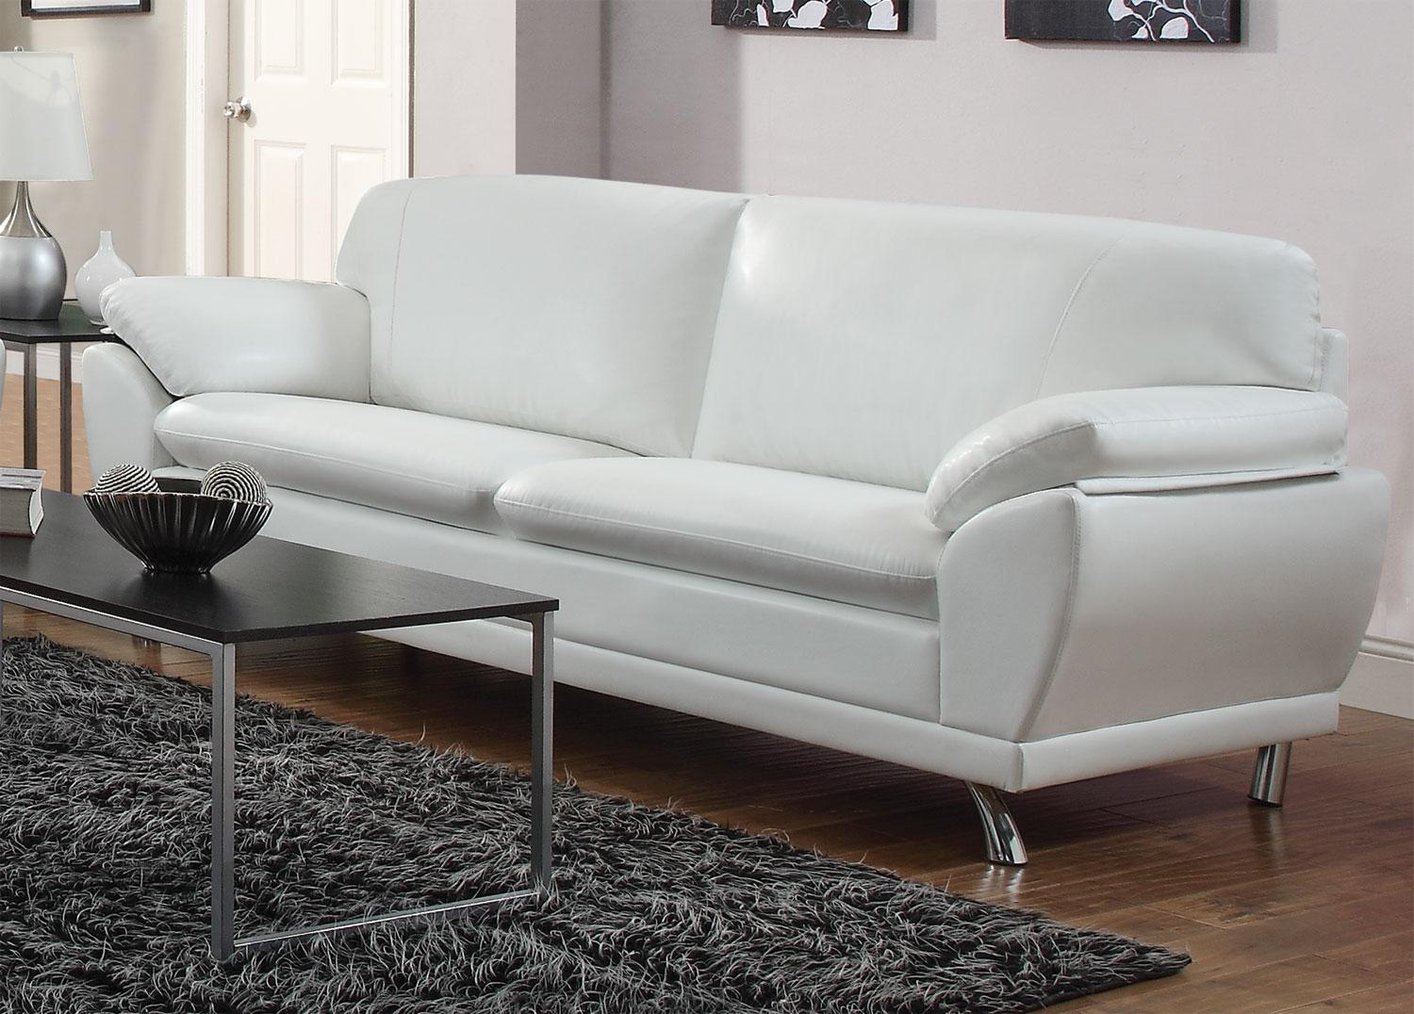 White leather sofa and its benefits